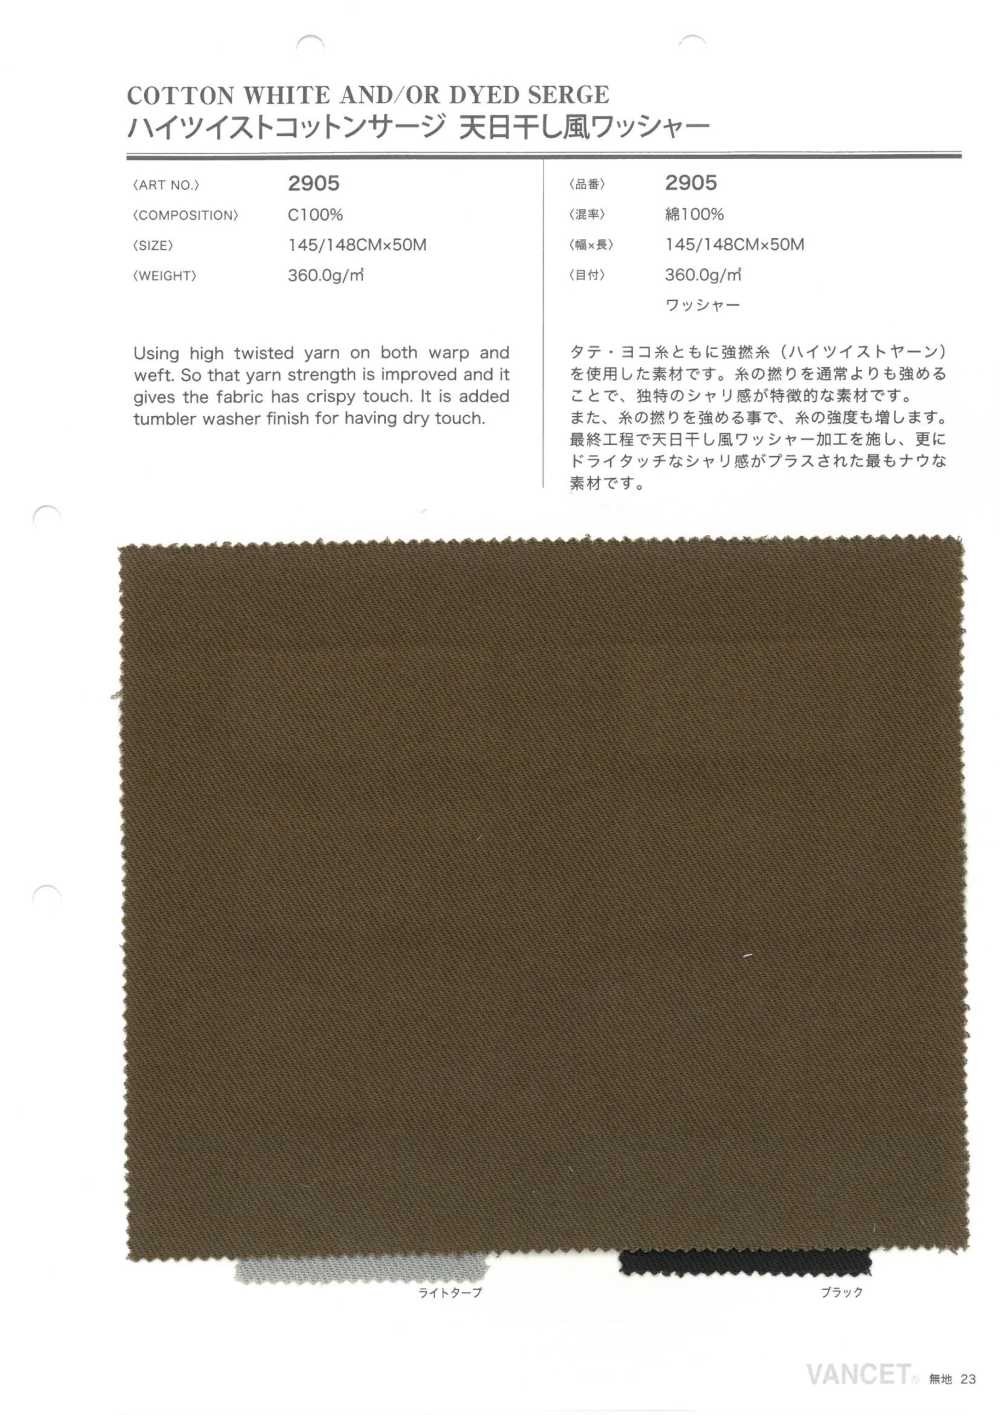 2905 High Twisted Cotton Serge Sun-dried Washer Processing[Textile / Fabric] VANCET